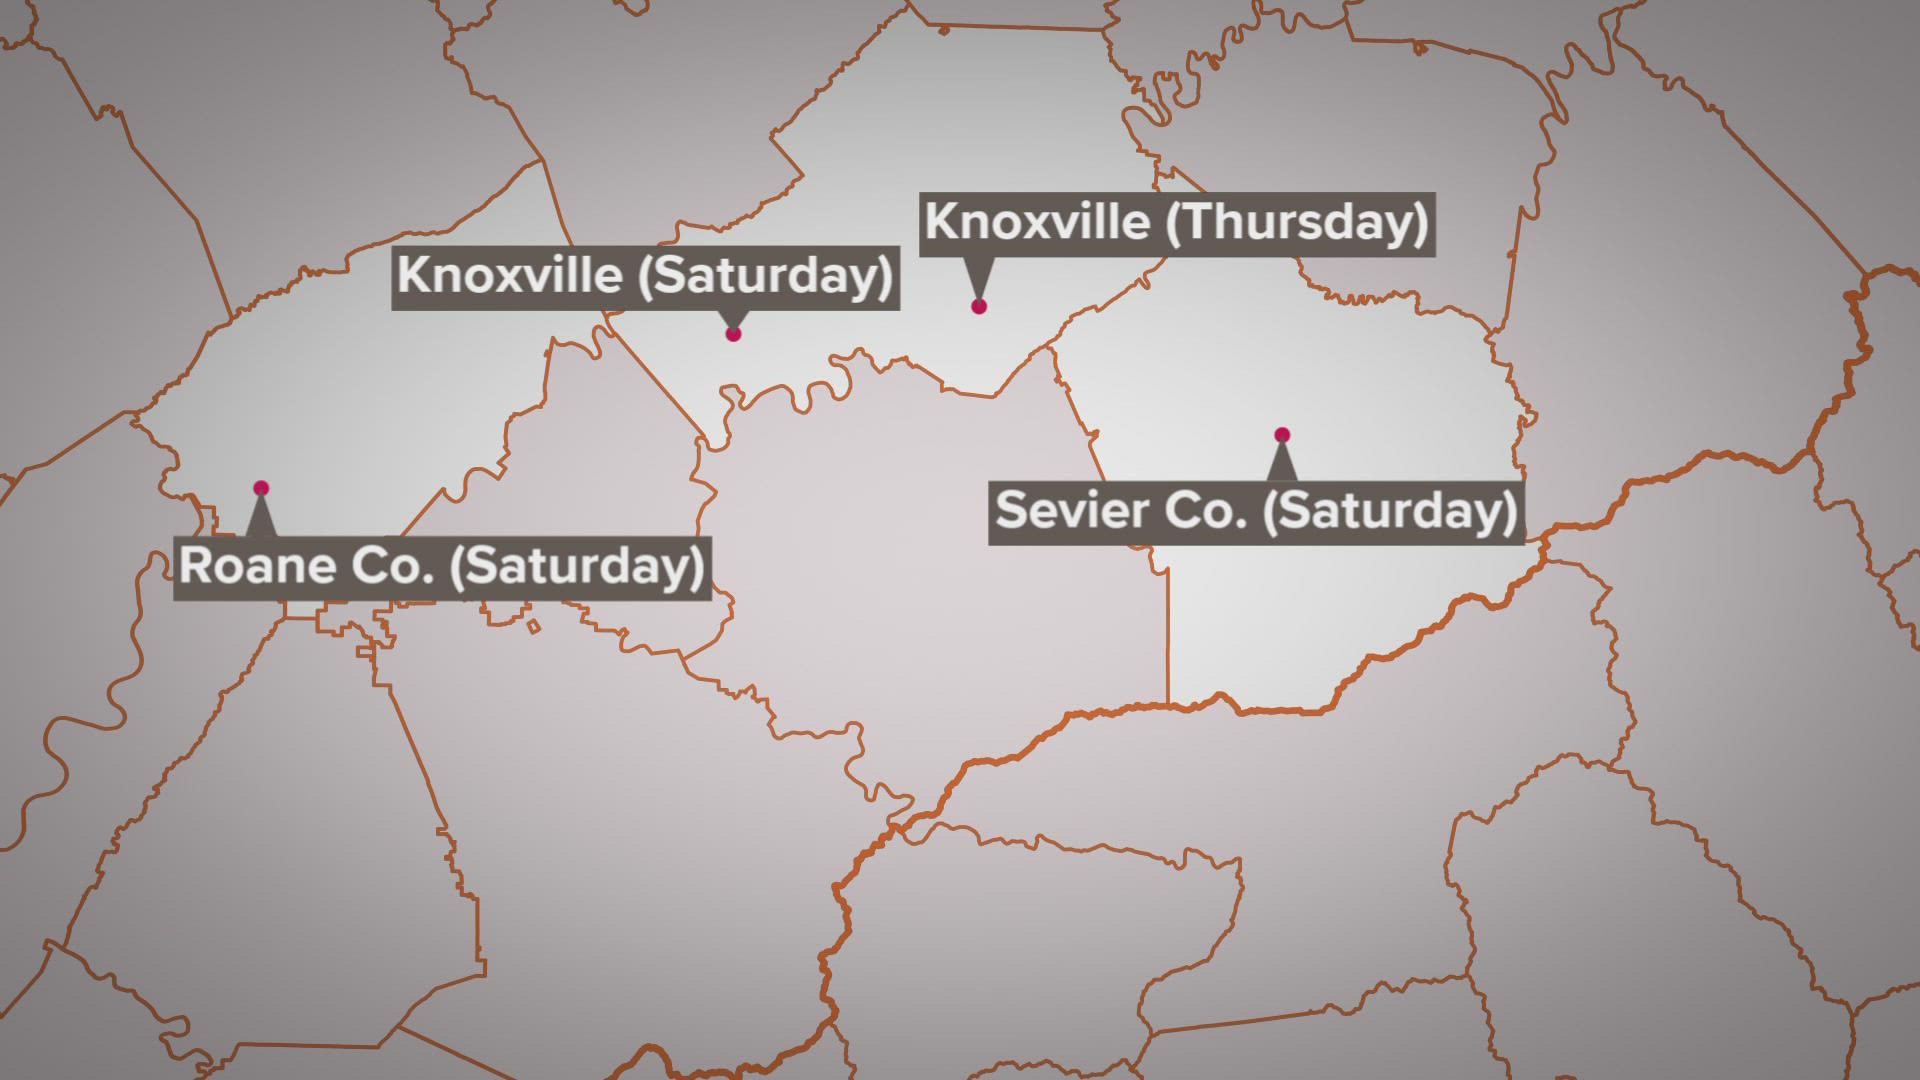 There were two deaths reported in Knoxville, one in Roane County and another in Sevier County.